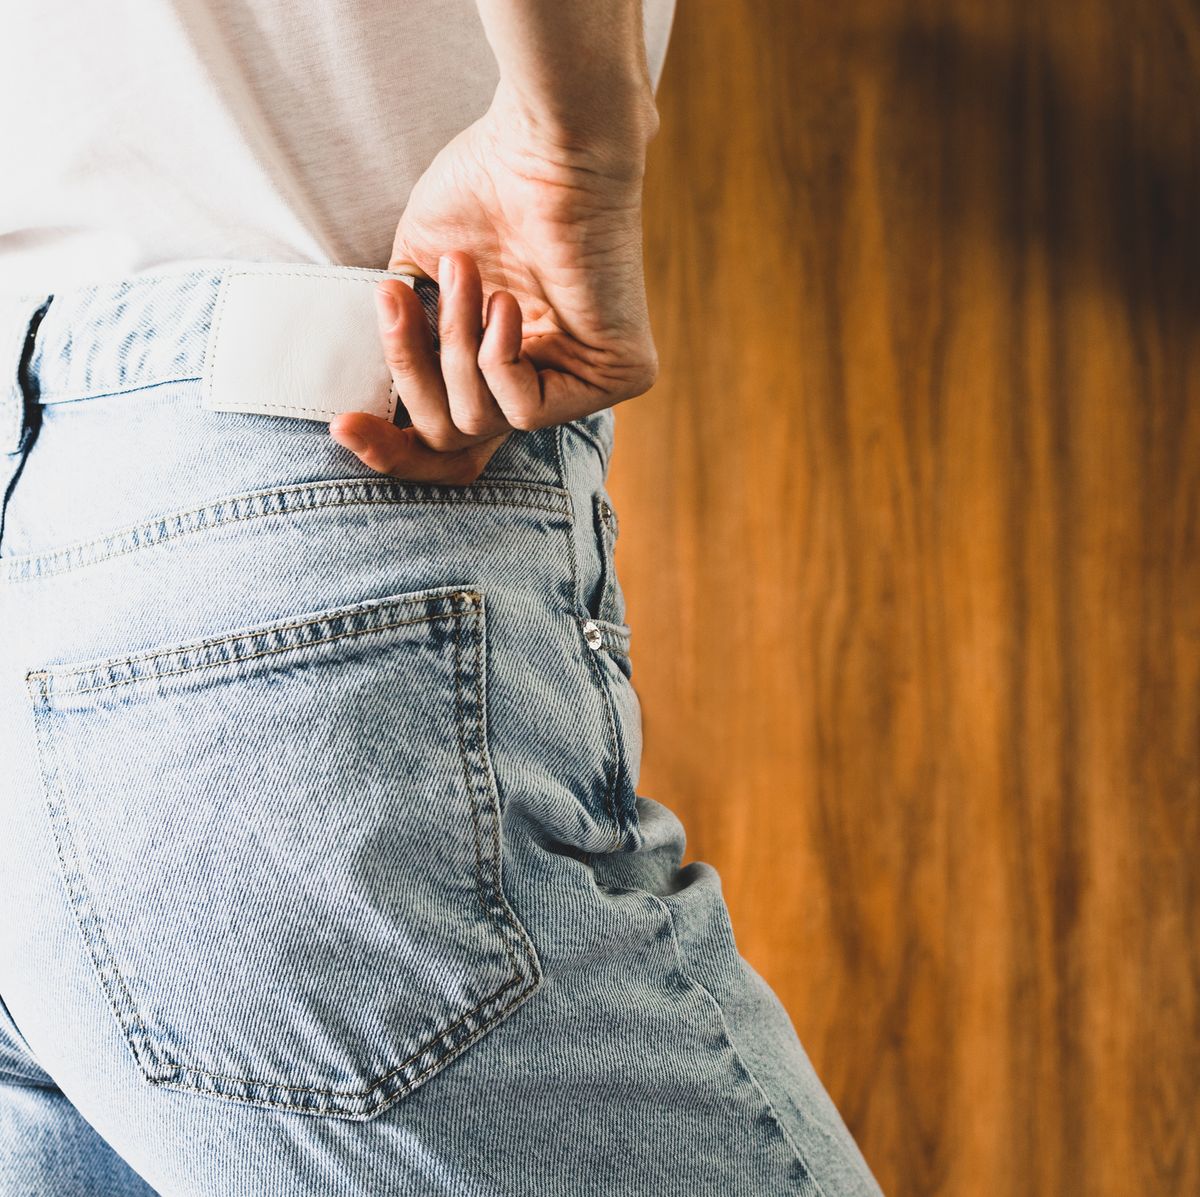 How to Care for Jeans, According to Three Experts